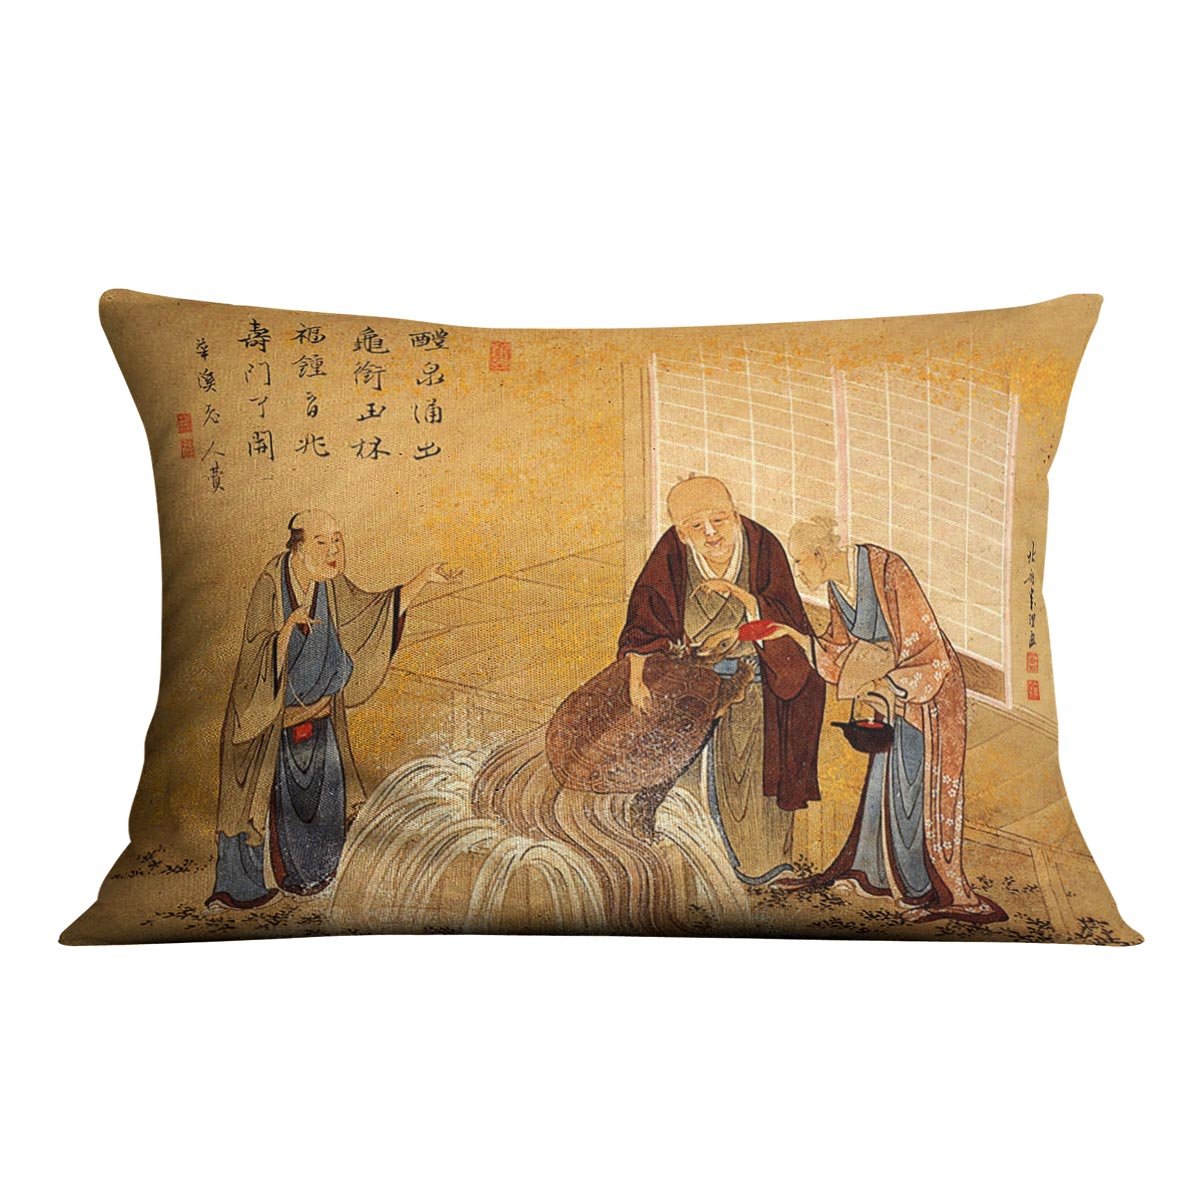 The thouthand years turtle by Hokusai Throw Pillow